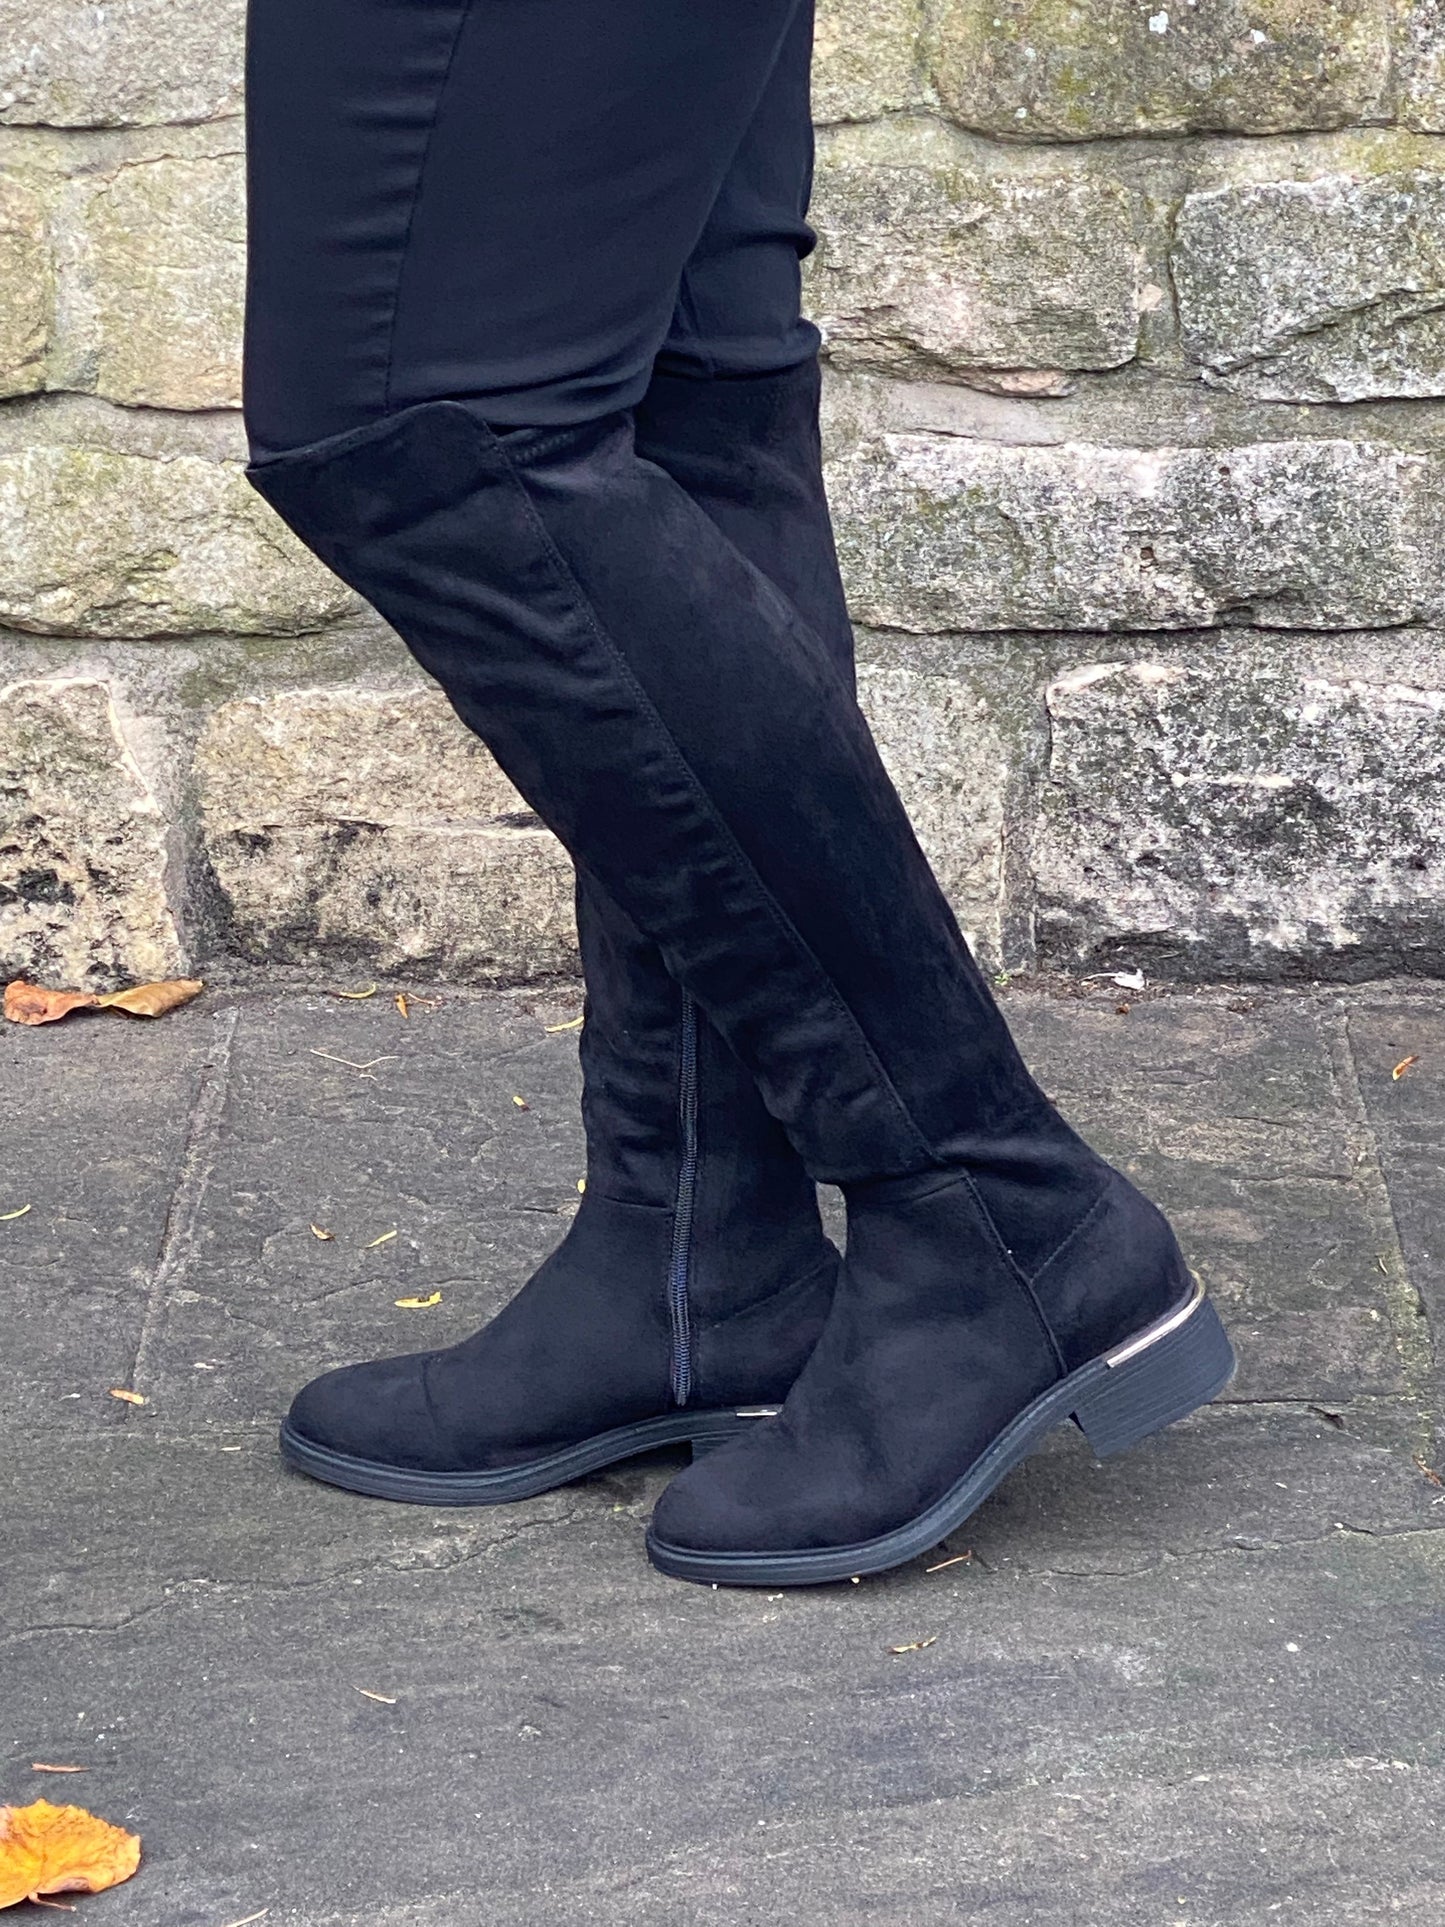 Black wide fit mock suede over the knee boot sizes 3-7